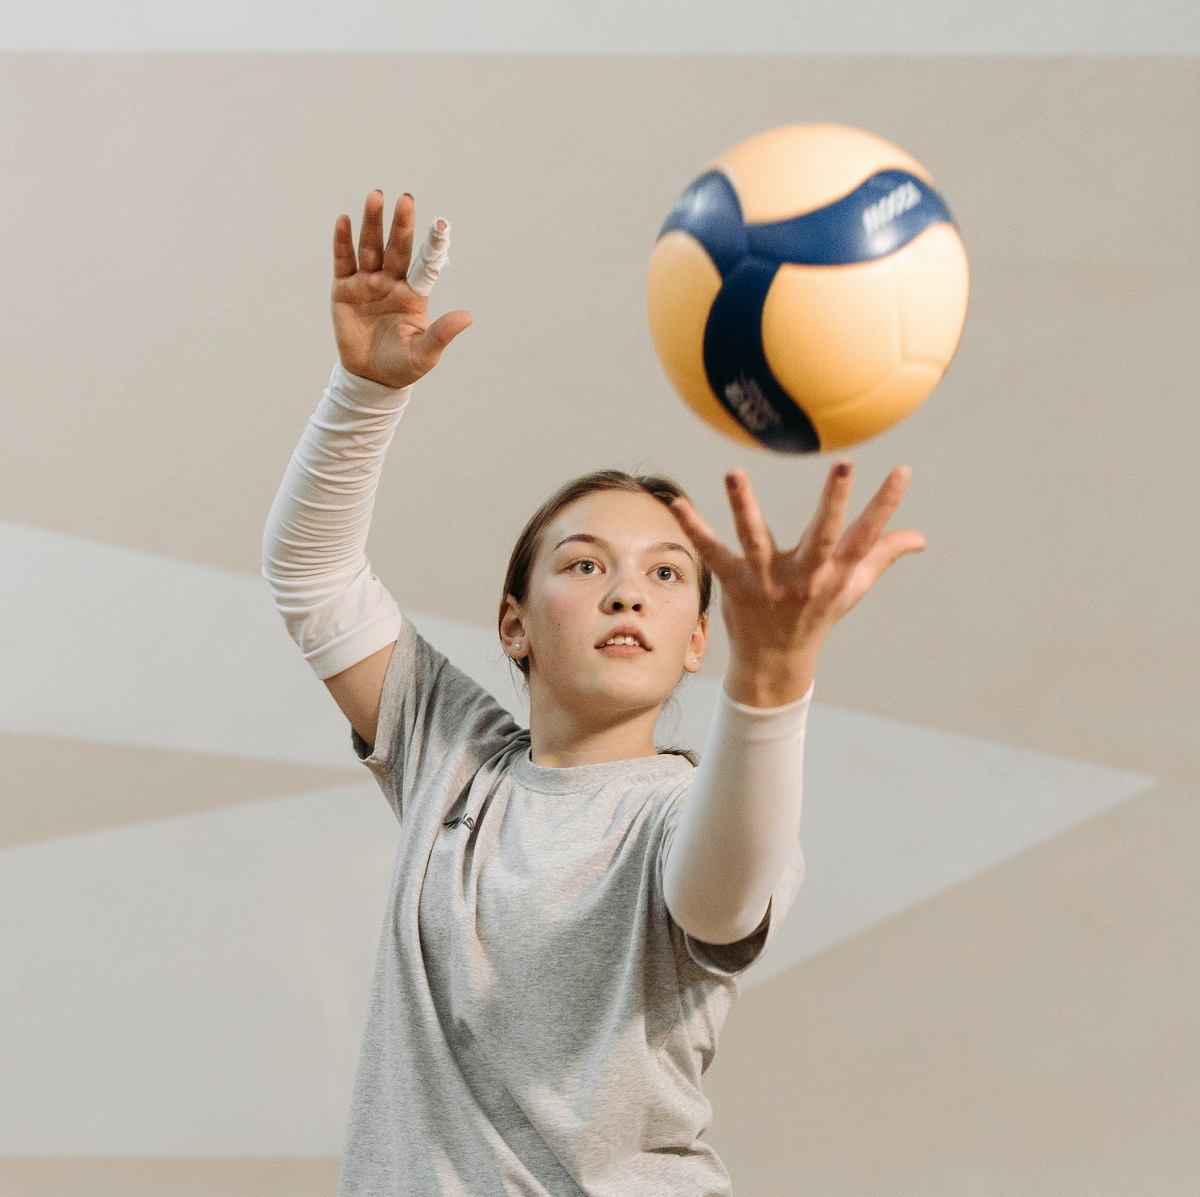 girl-serving-an-ace-in-volleyball